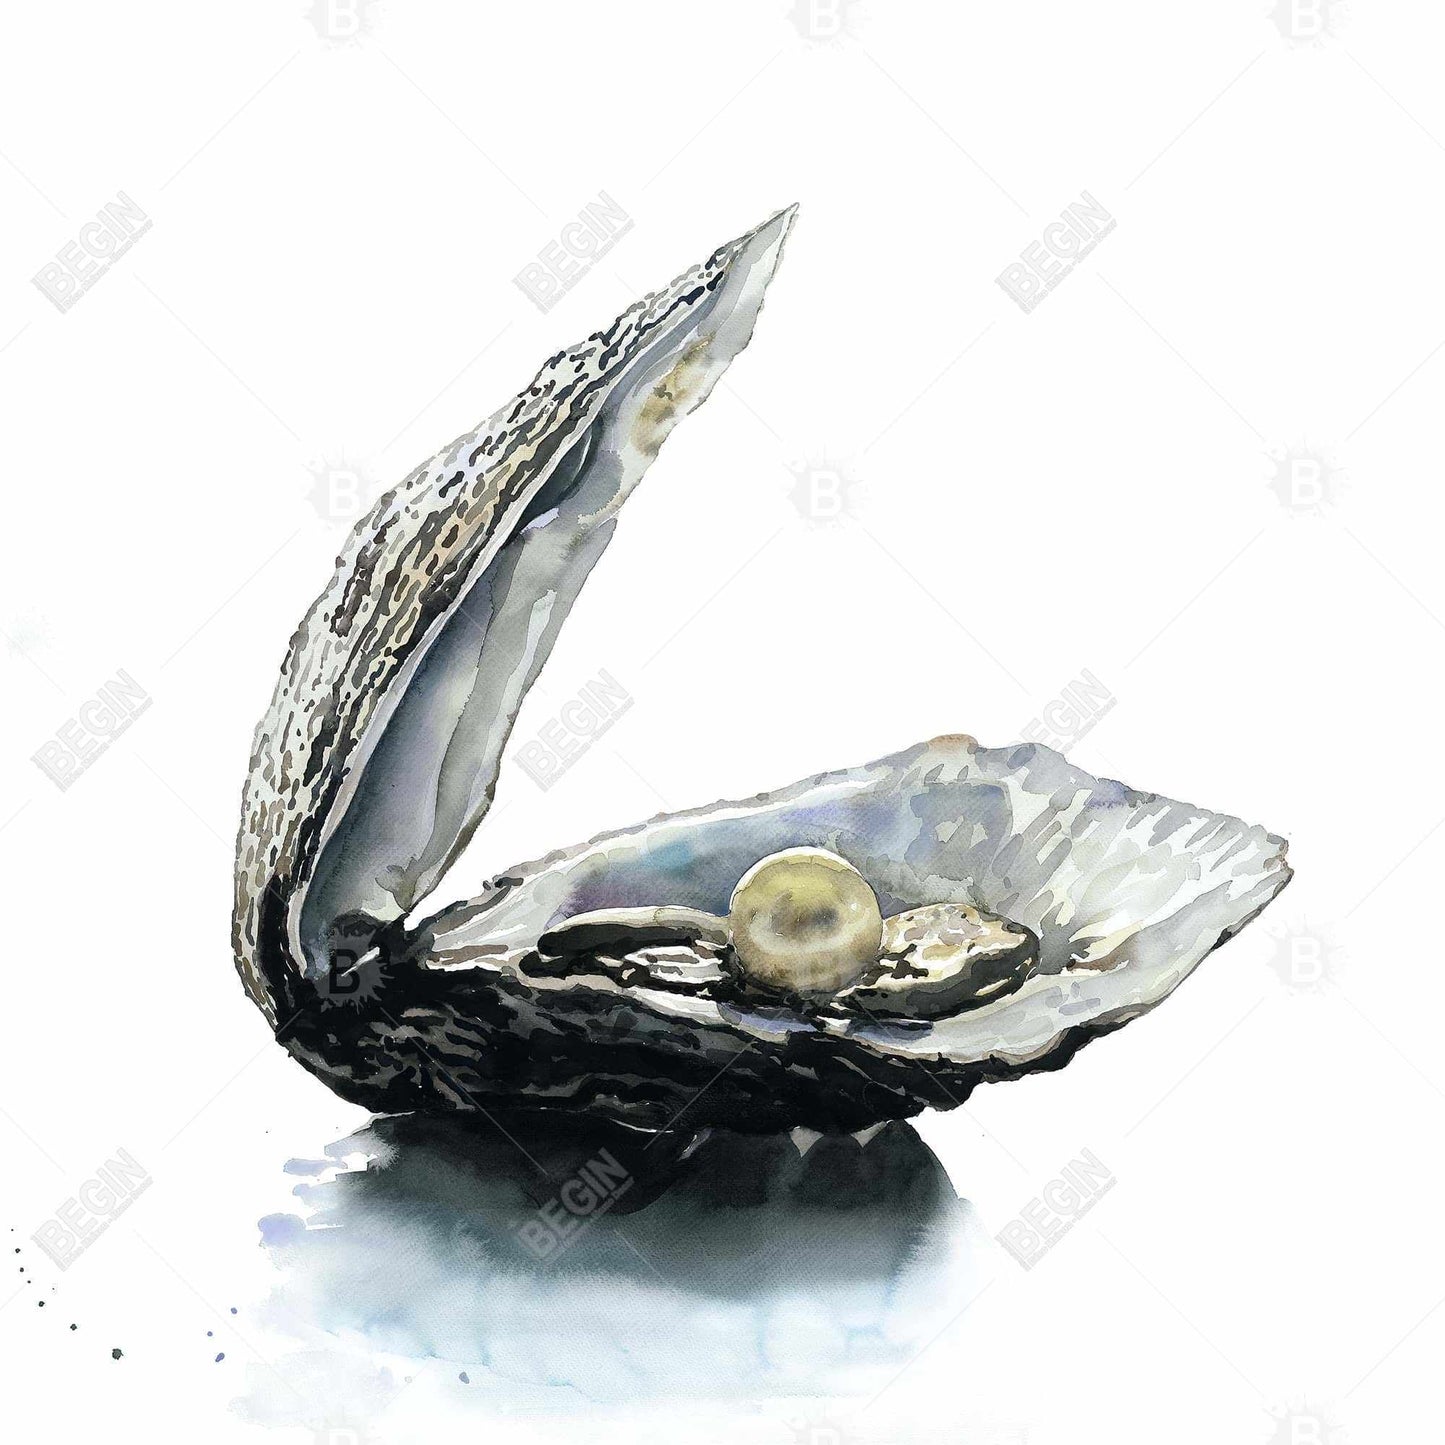 Pearl oyster - 32x32 Print on canvas